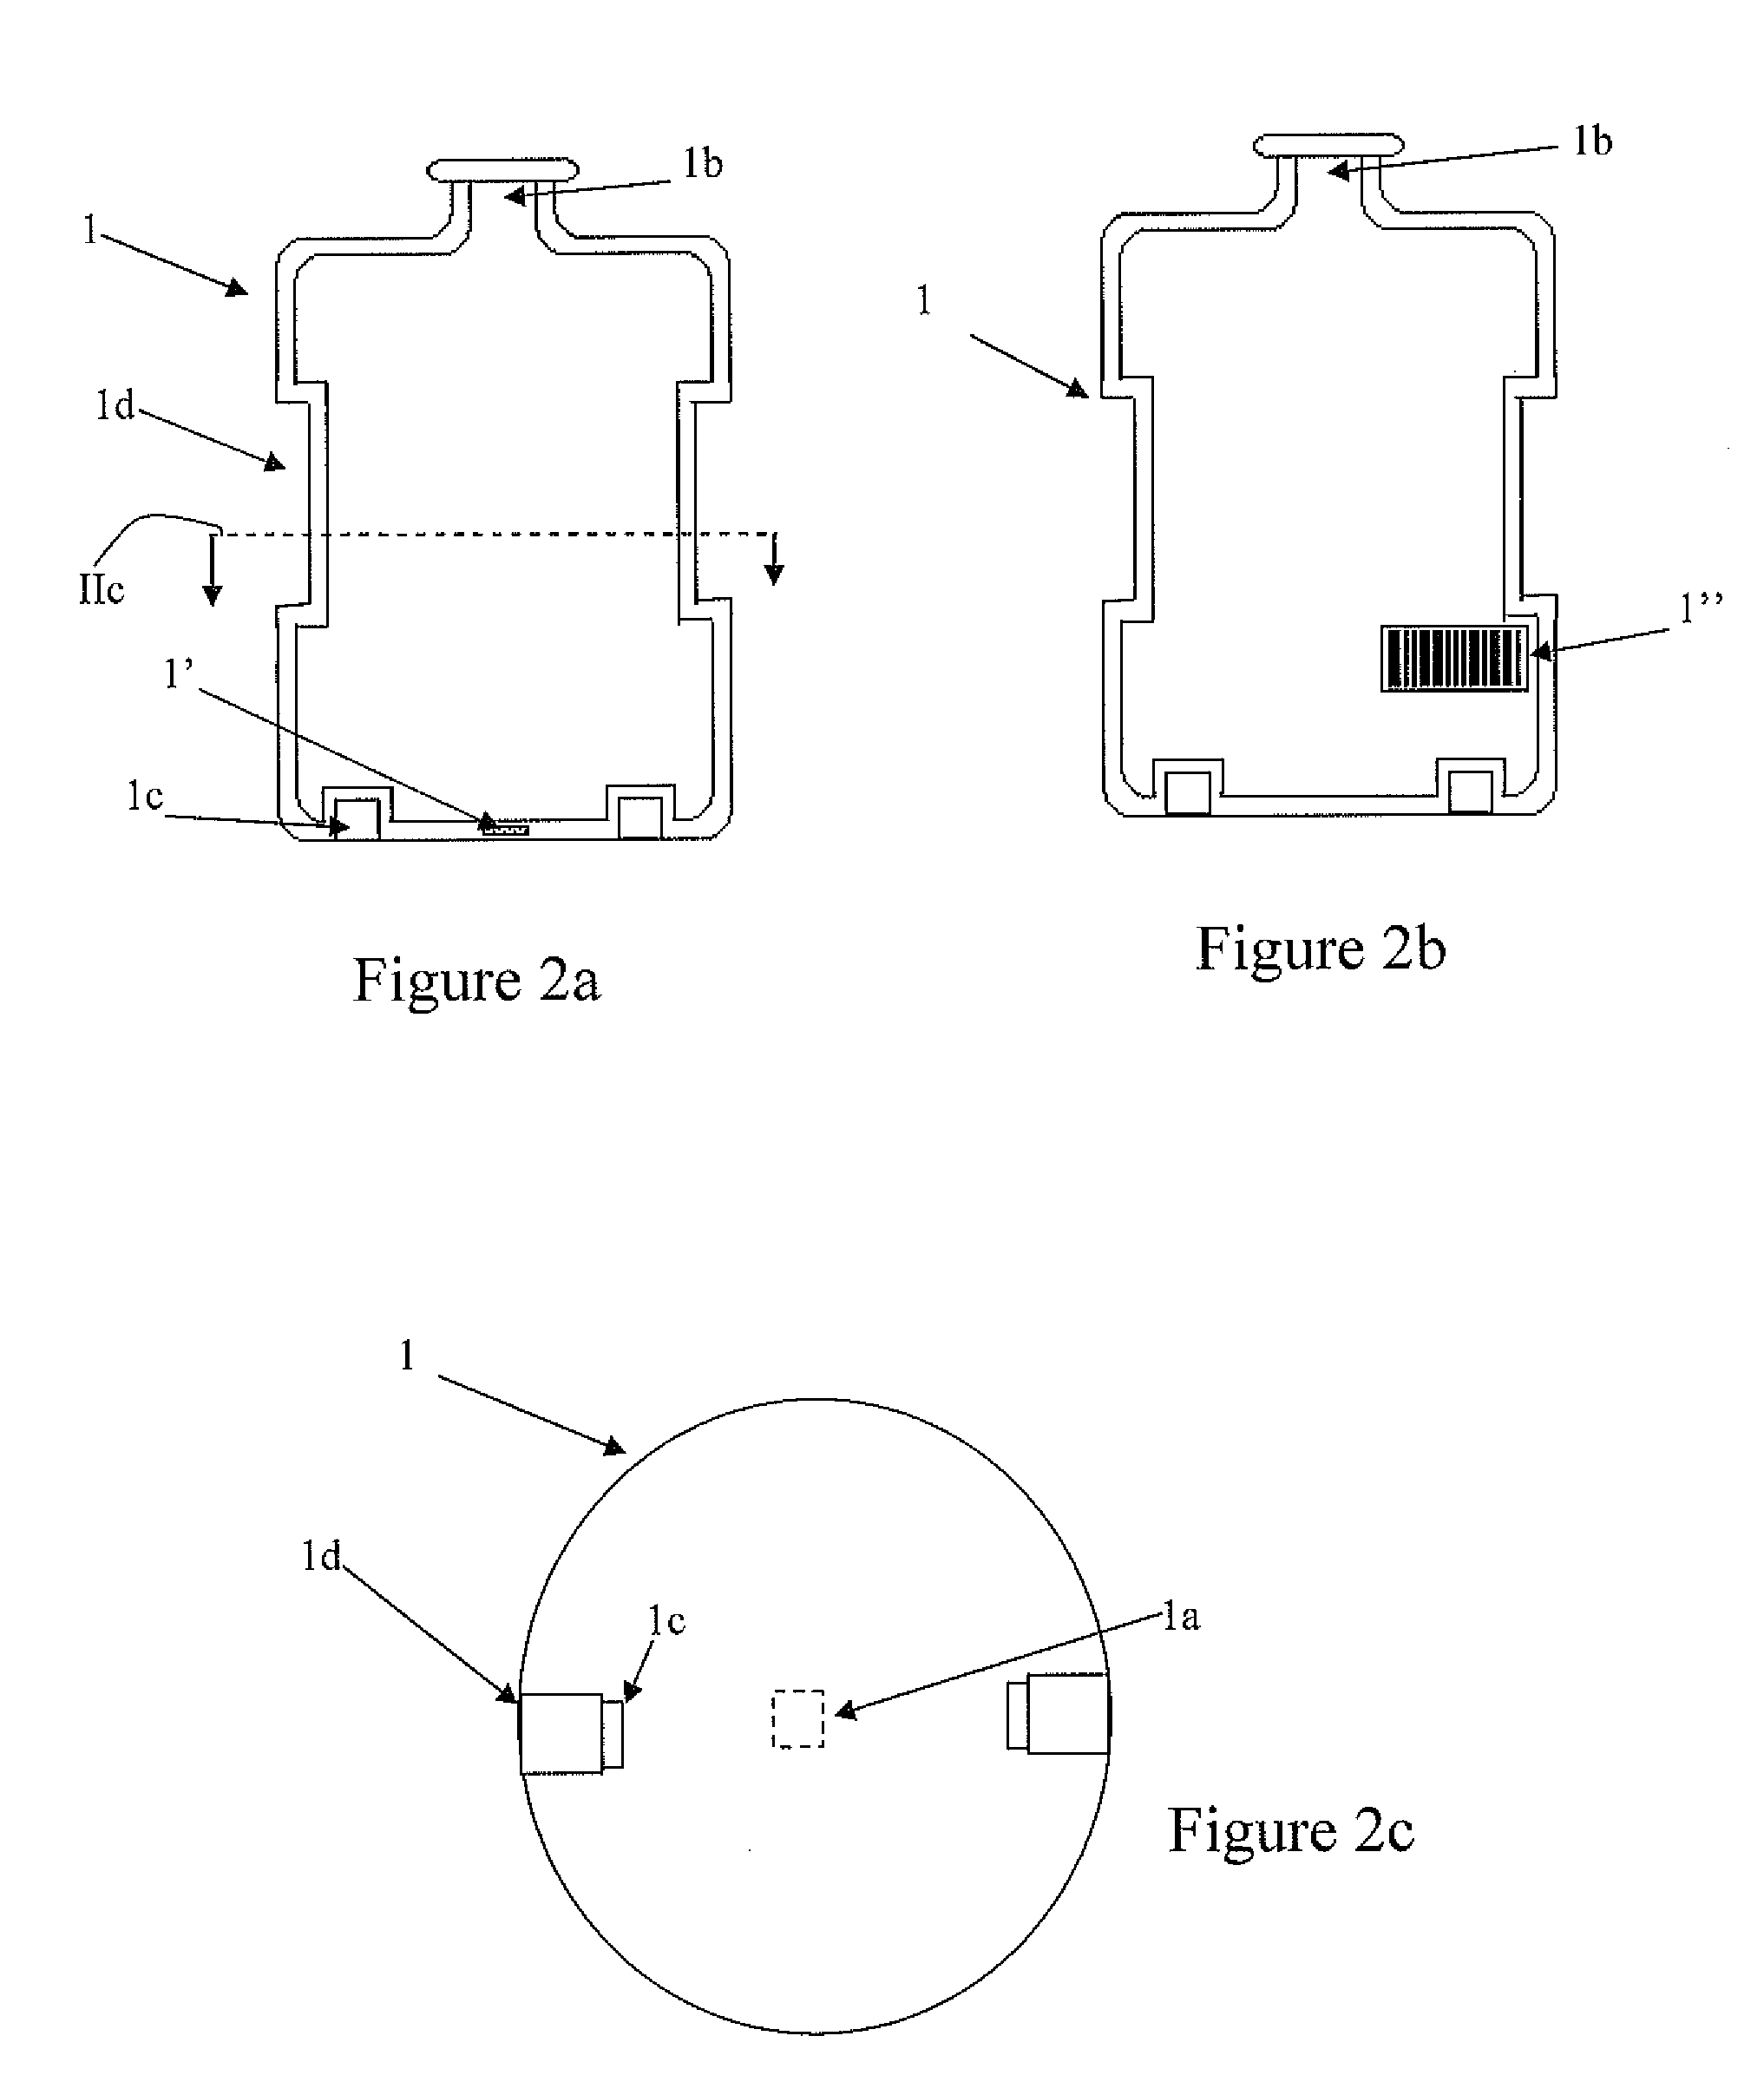 Method and Apparatus for Refilling a Container with a Fluid